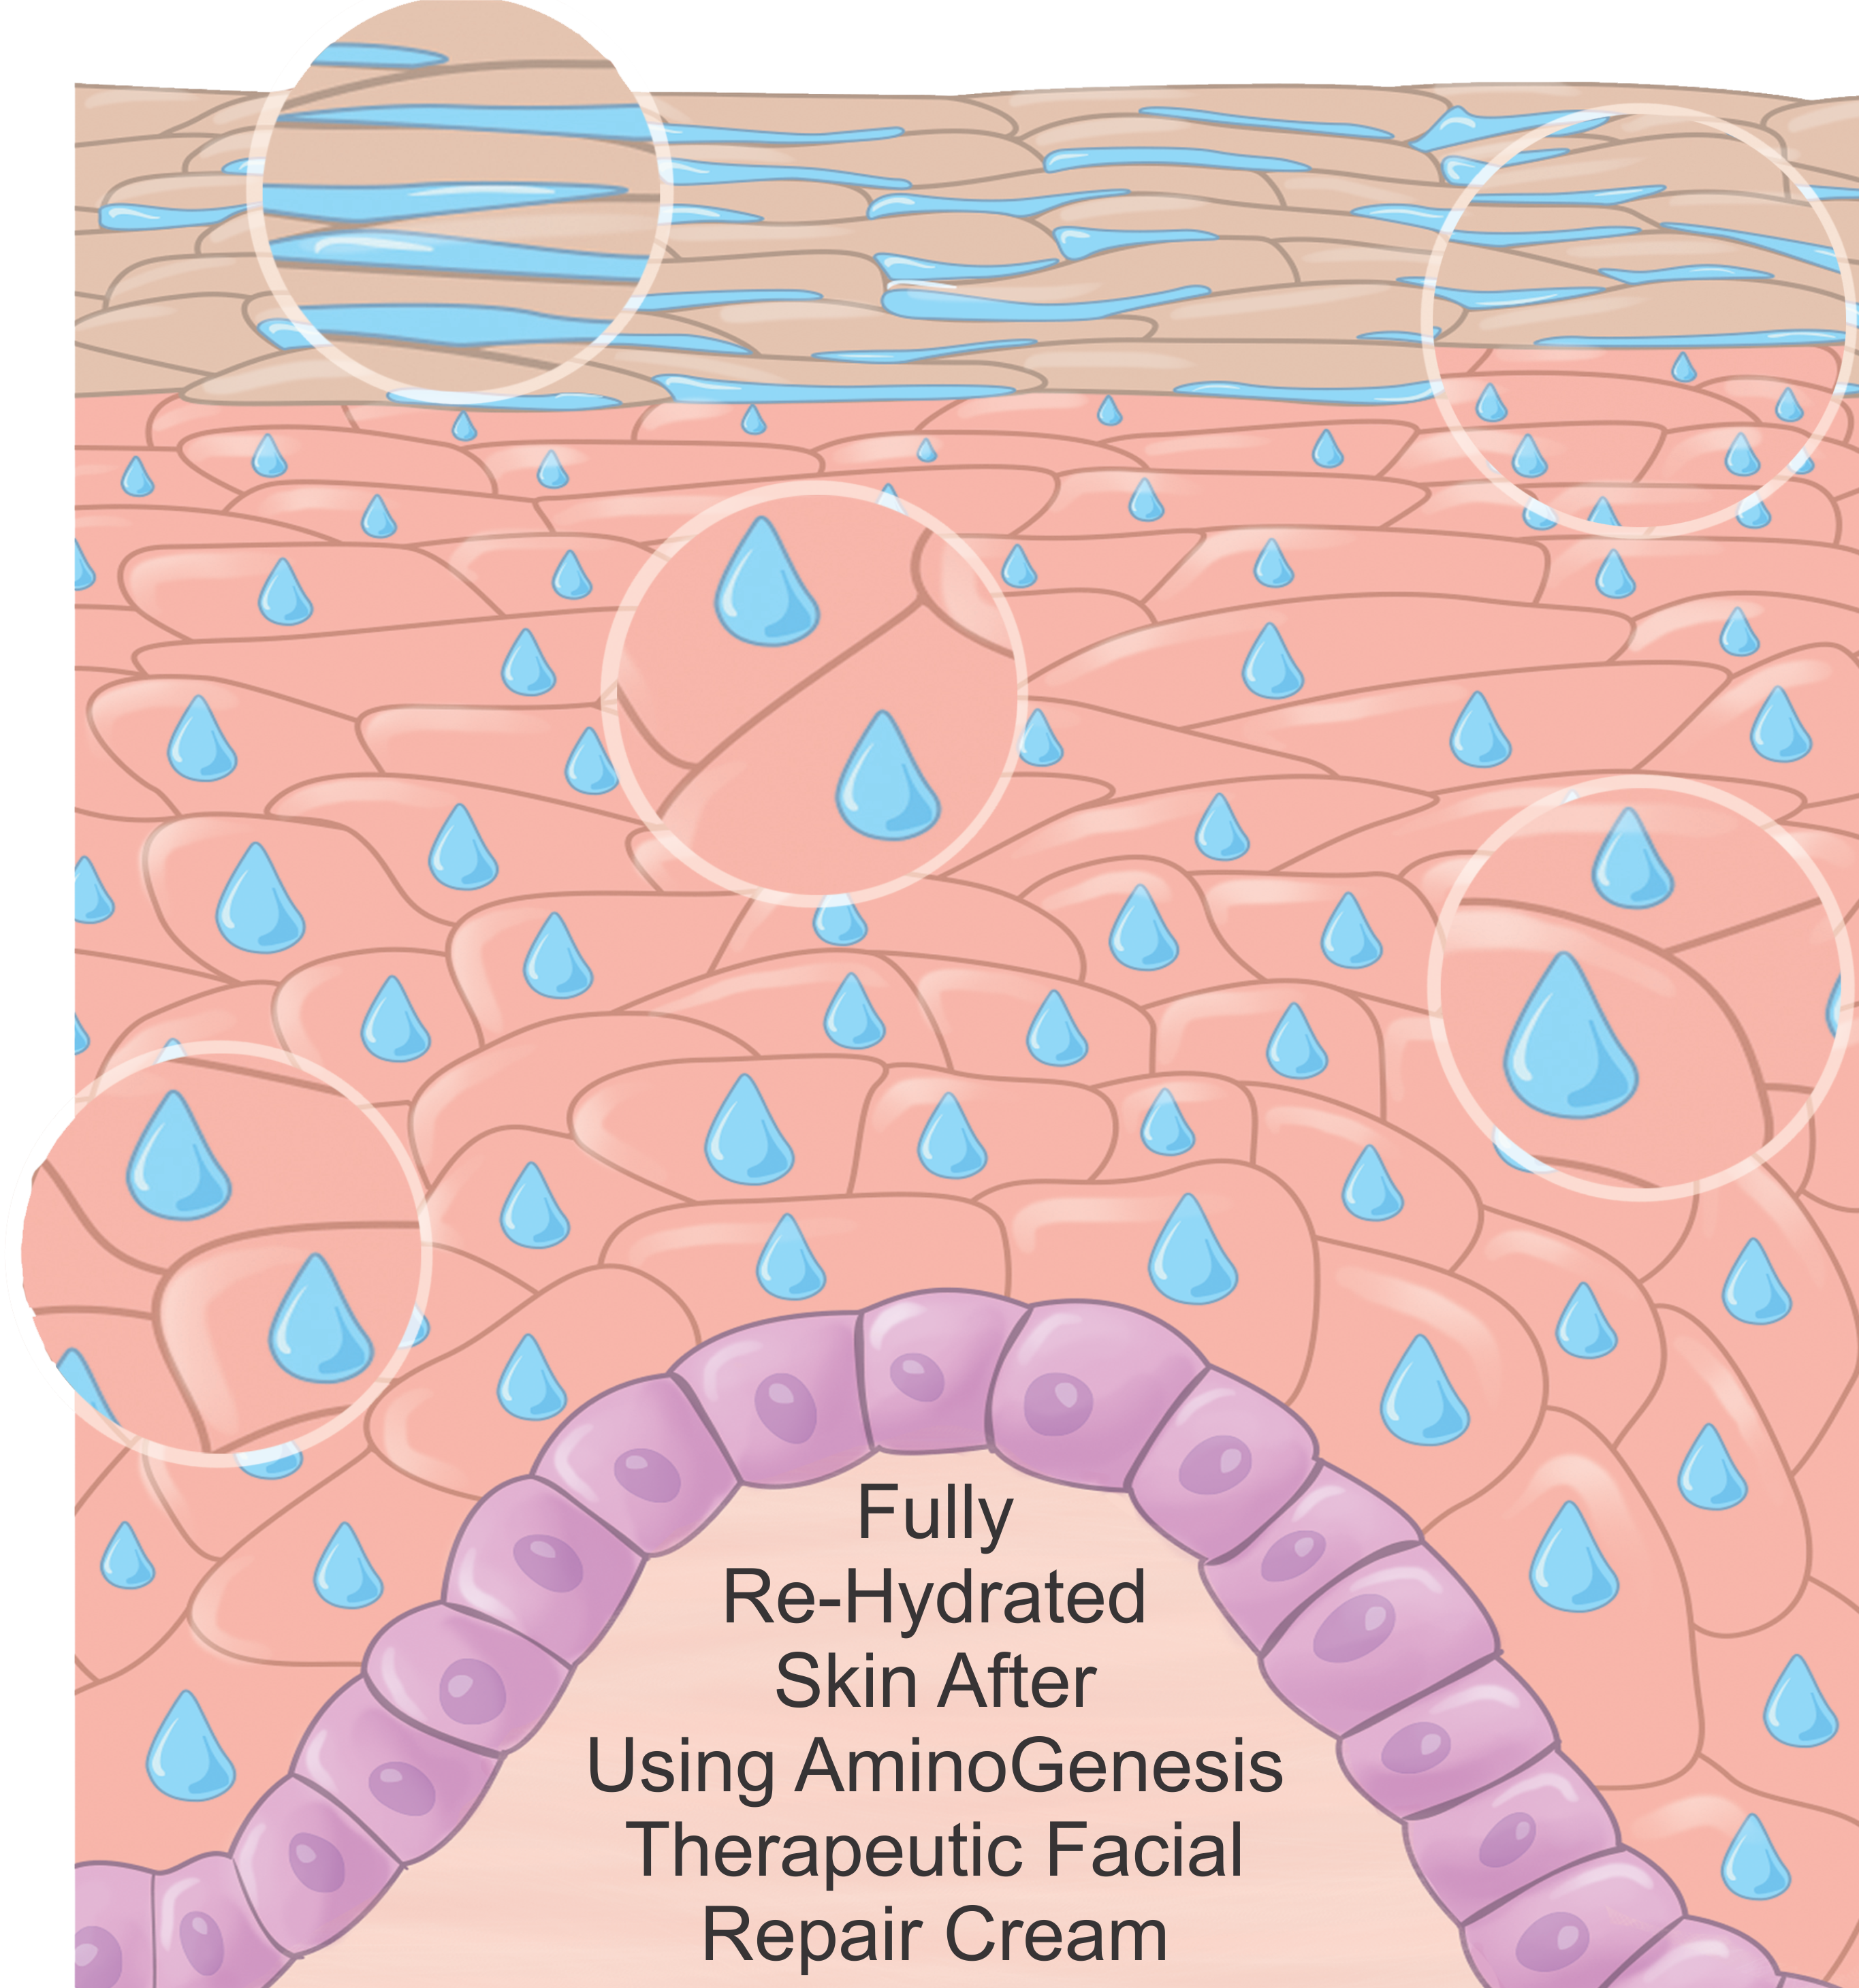 Illustration showing hydrated cells after using AminoGenesis Therapeutic Facial Repair Moisturizer